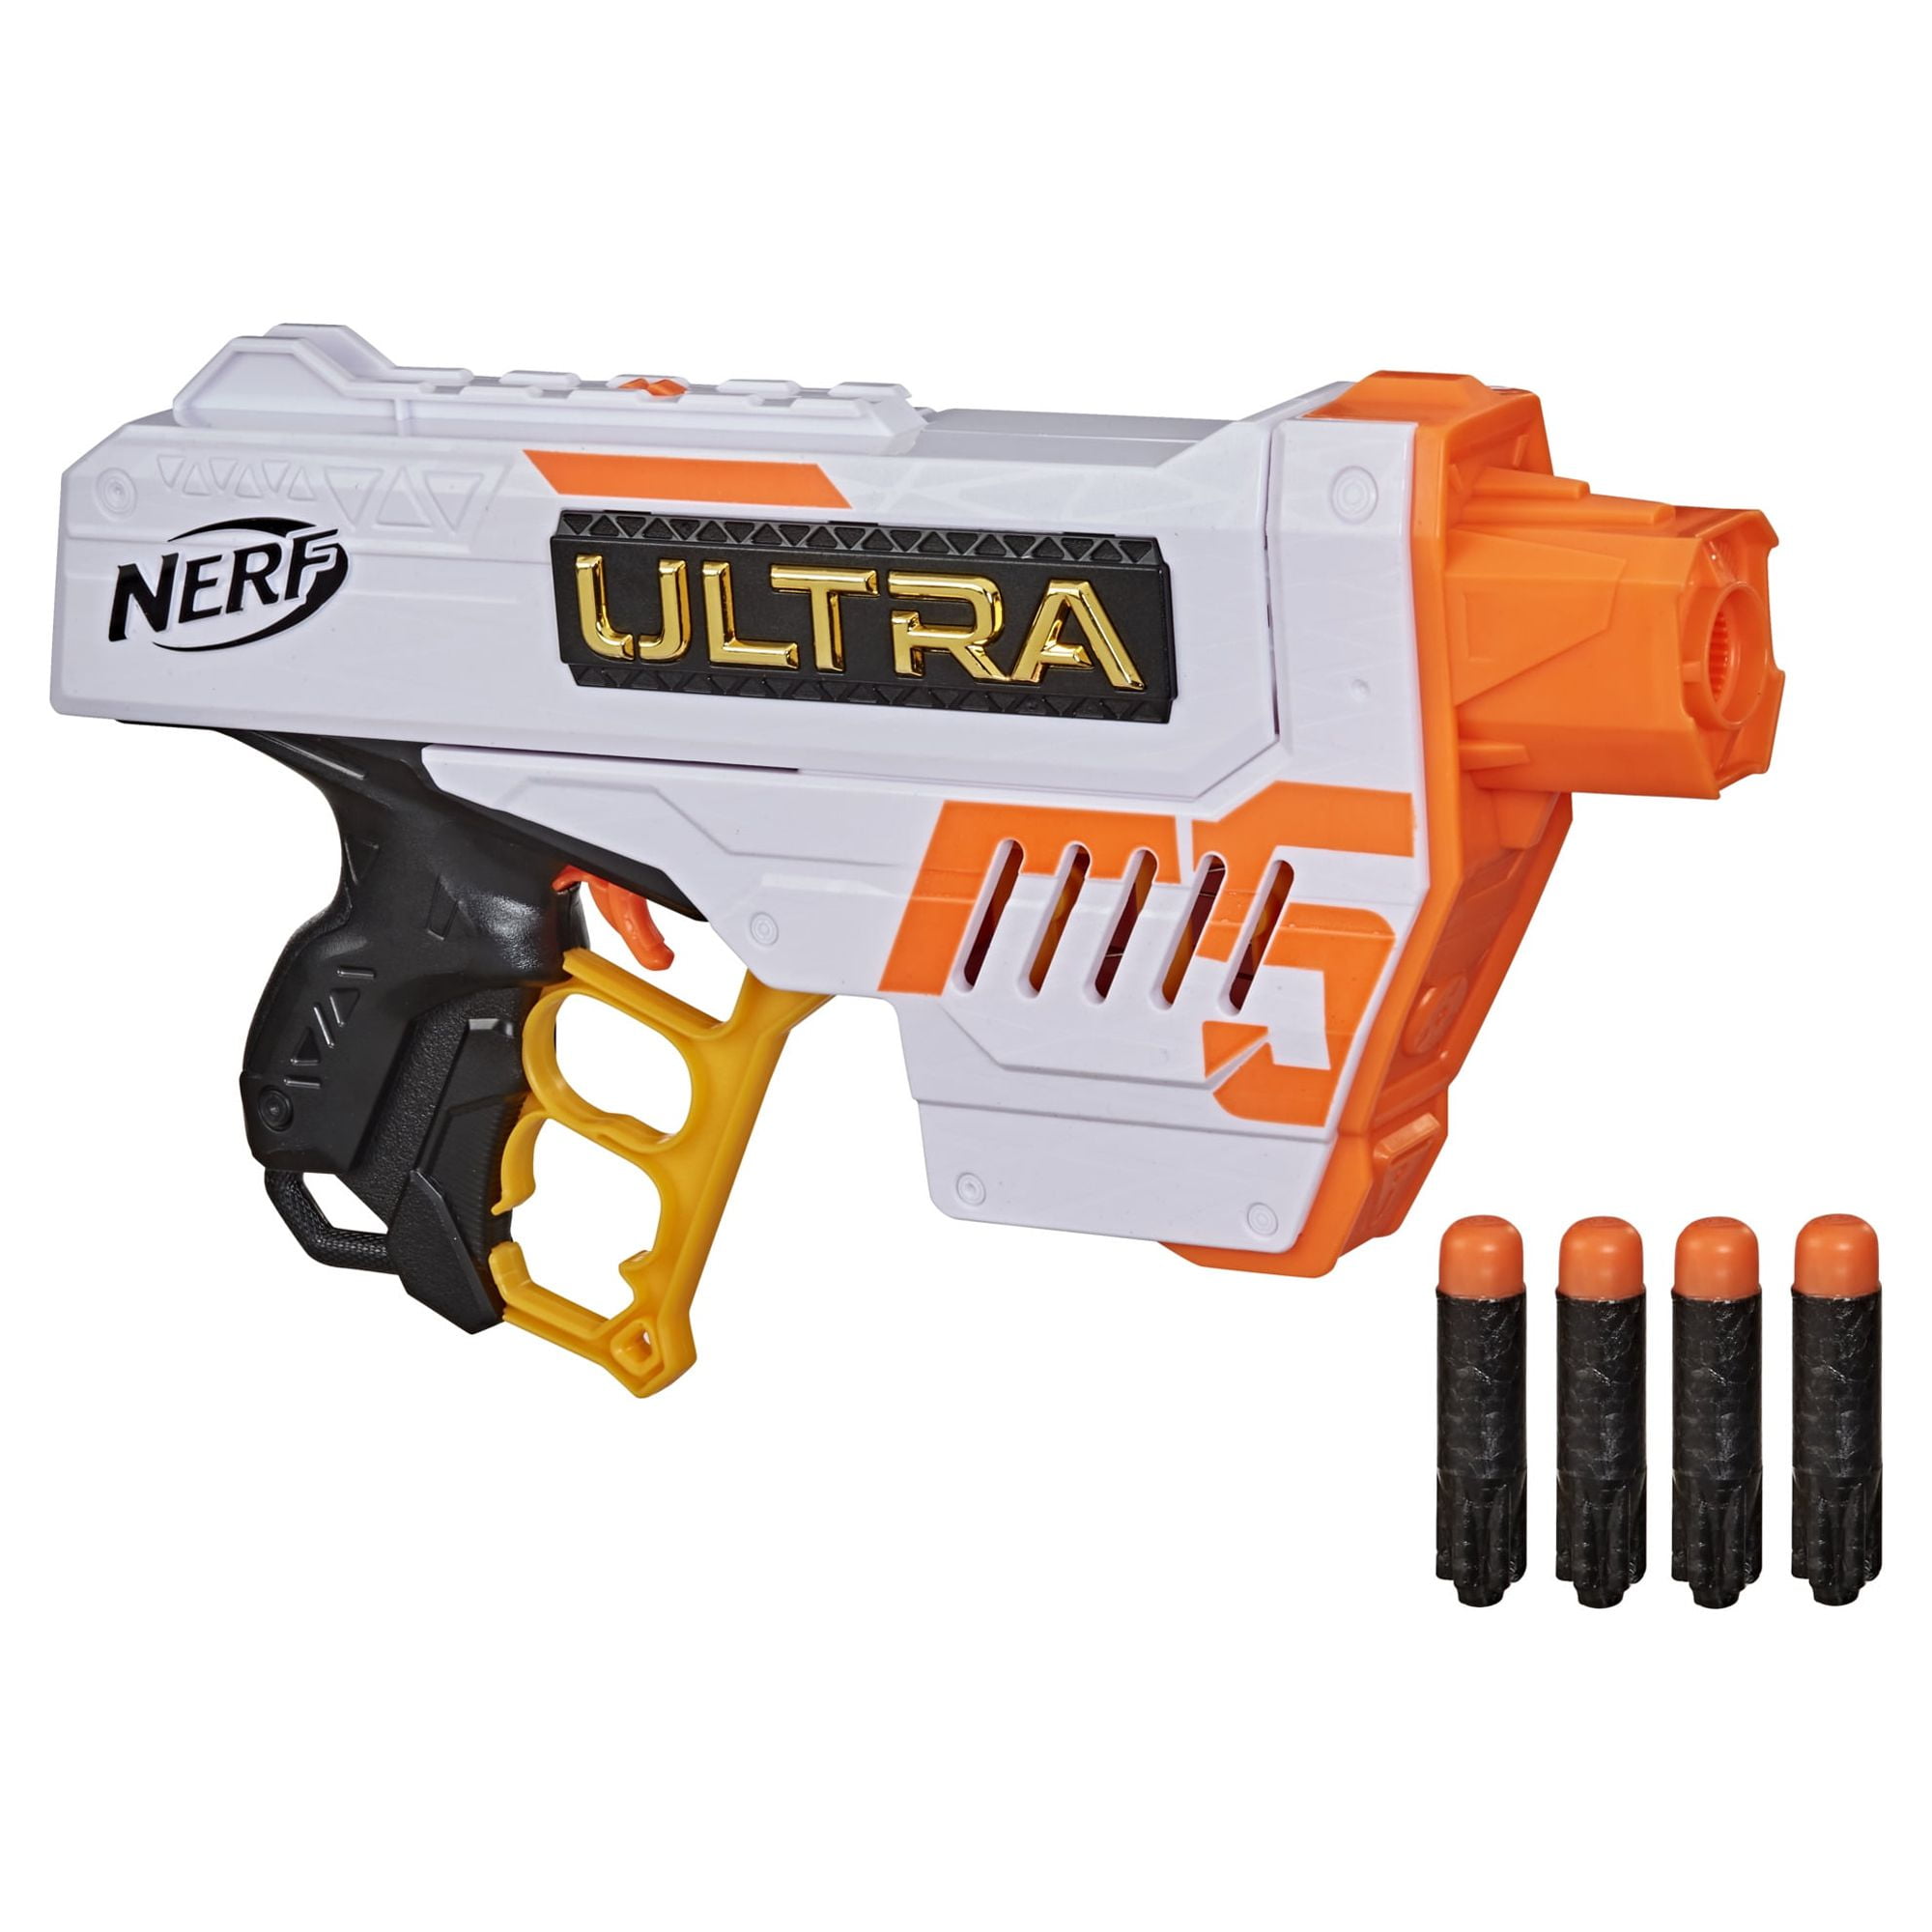 Nerf Ultra Five Kids Toy Blaster with 4 Darts 